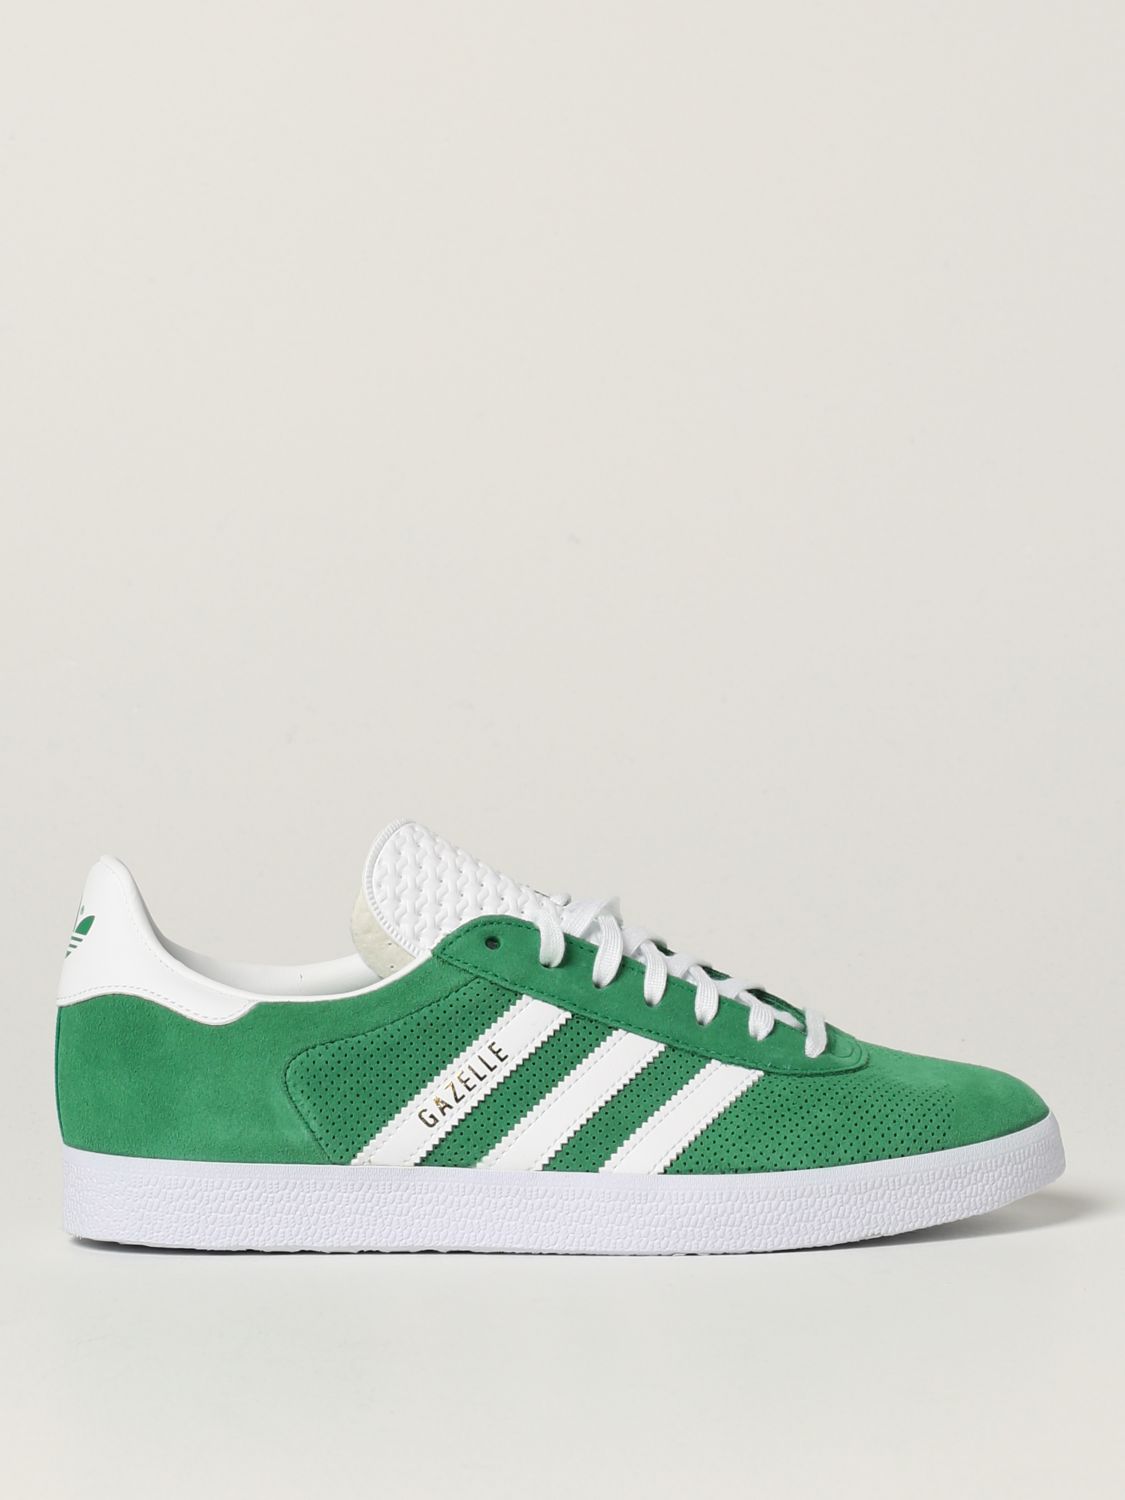 ADIDAS ORIGINALS: Gazelle Adidas sneakers in suede and synthetic leather | Sneakers  Adidas Originals Men Green | Sneakers Adidas Originals H02215 GIGLIO.COM